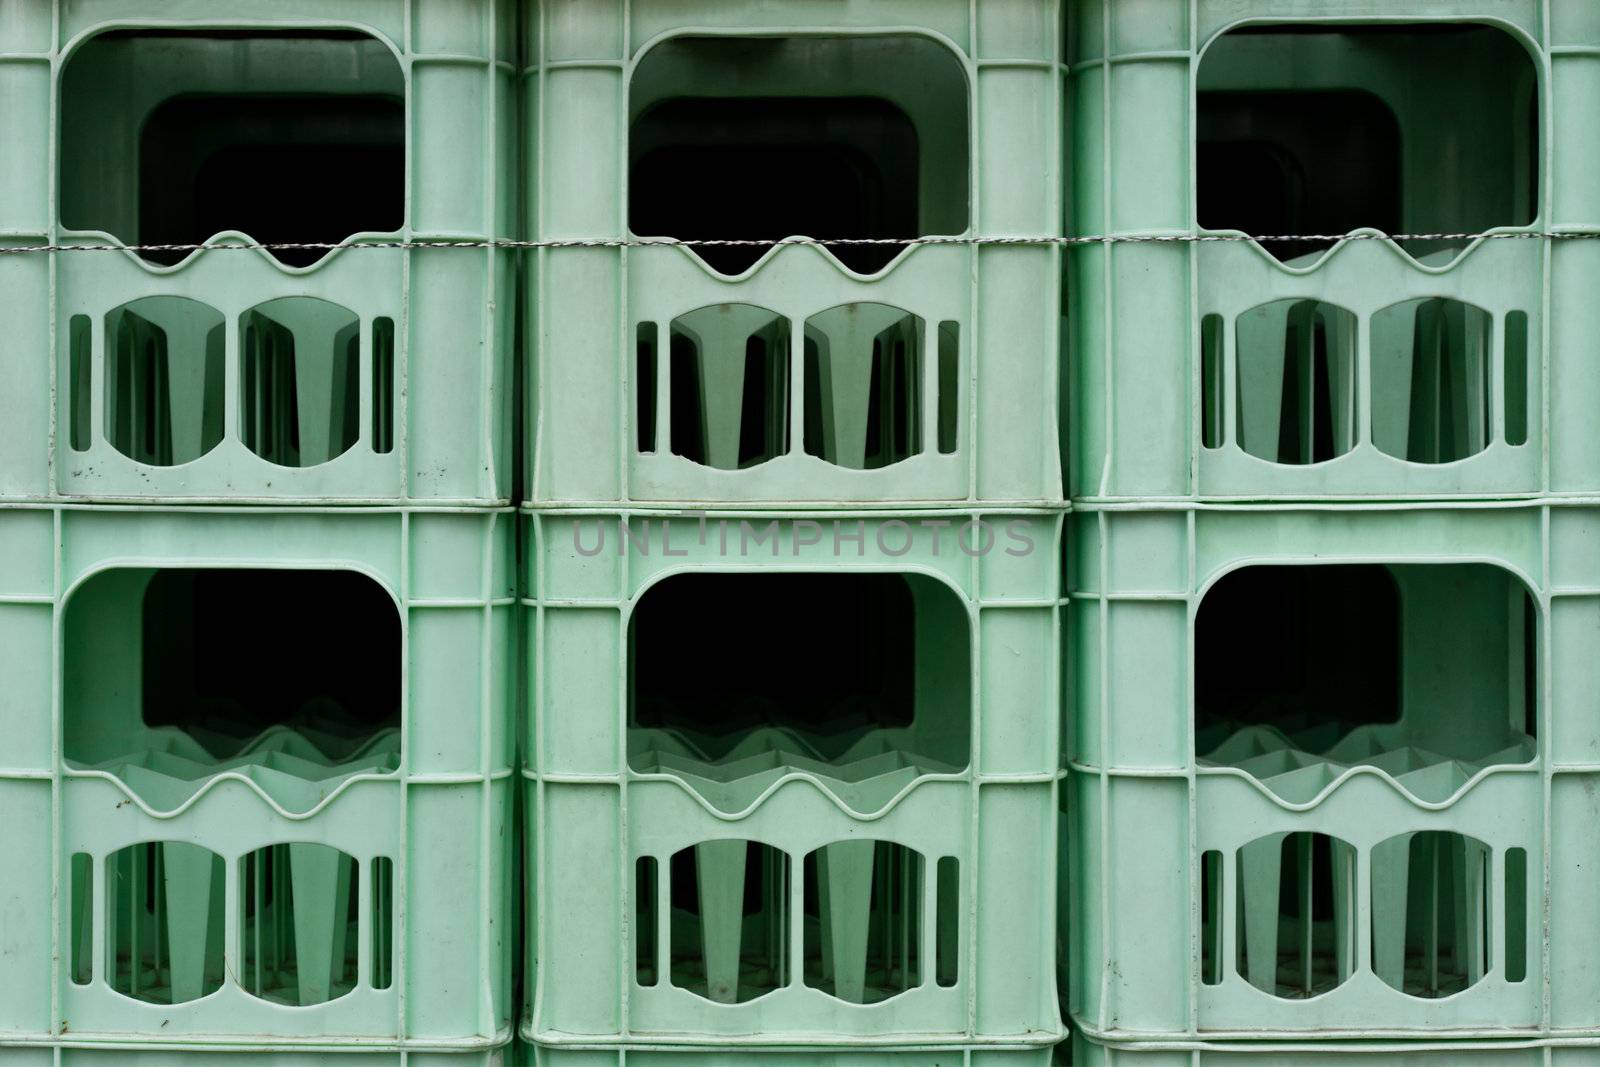 Stacked empty bottle crates by PiLens